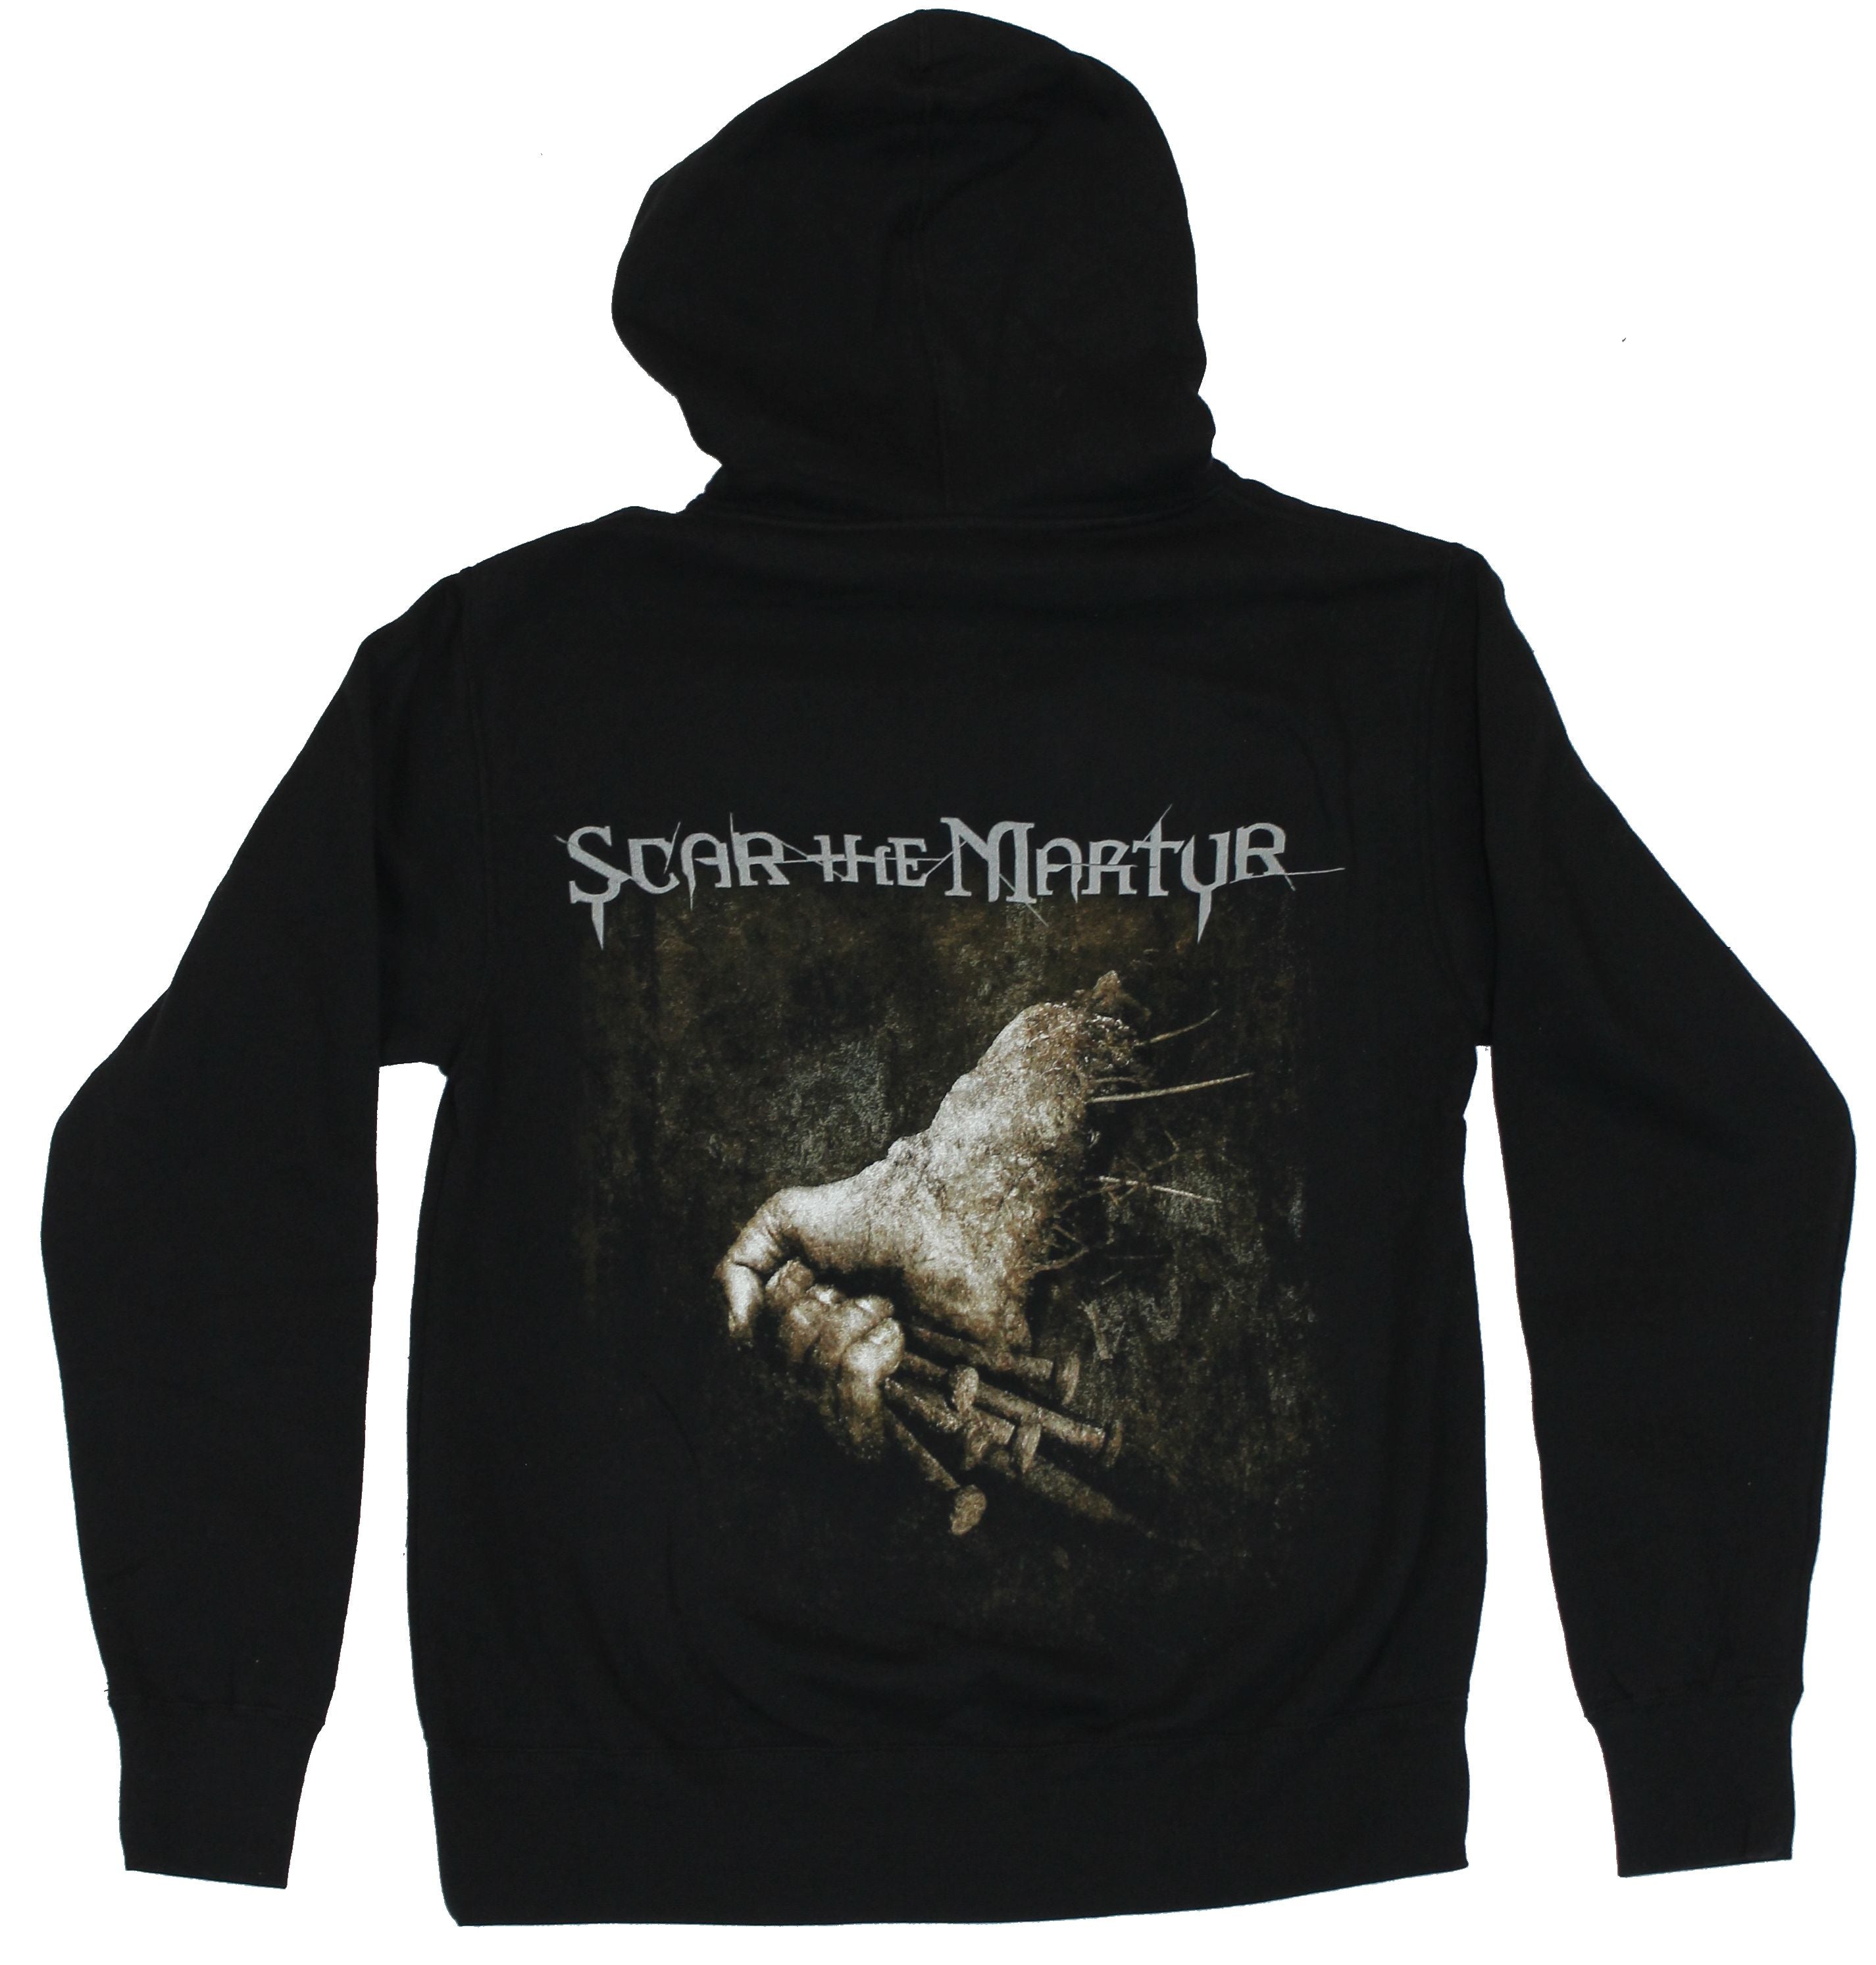 Scar the Martyr Mens Zip Up Hoodie - STM Scary Hand And Nails Back Image